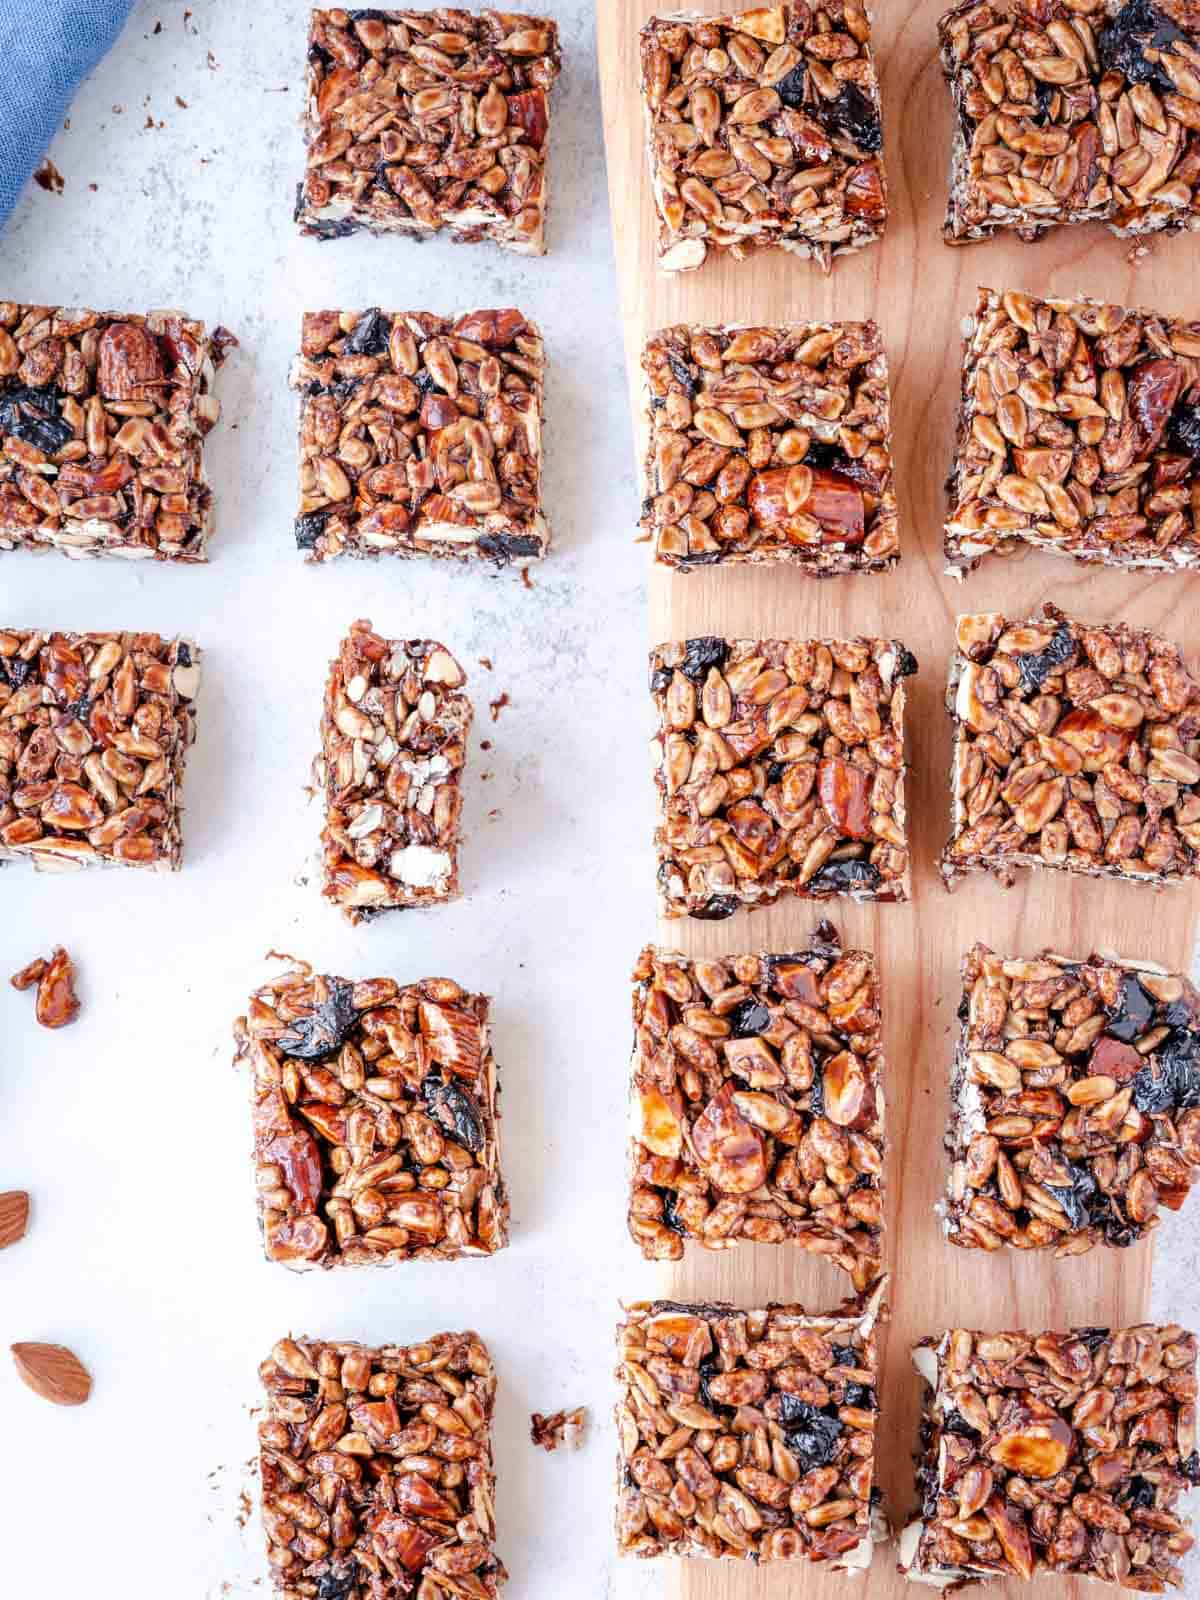 Almond cherry pepita bars cut into squares on a wood board with a blue napkin.